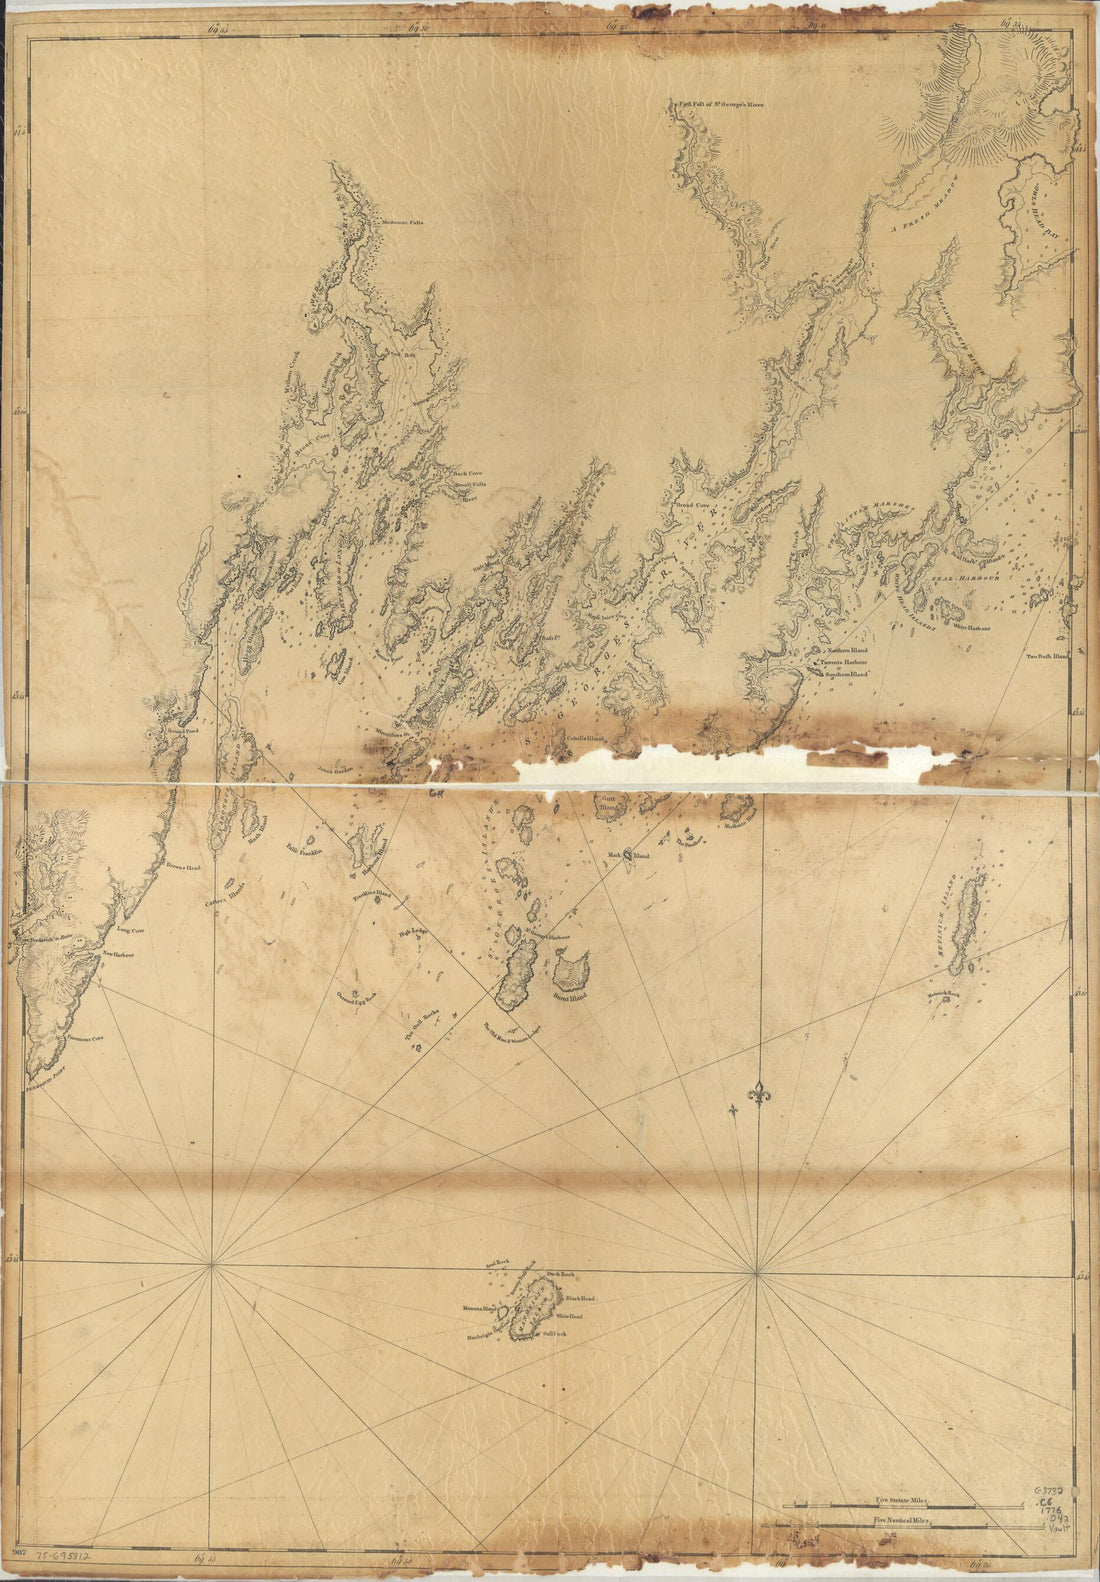 This old map of Coast of Maine from Rockland Harbor to Pemaquid Point from 1776 was created by Joseph F. W. (Joseph Frederick Wallet) Des Barres in 1776